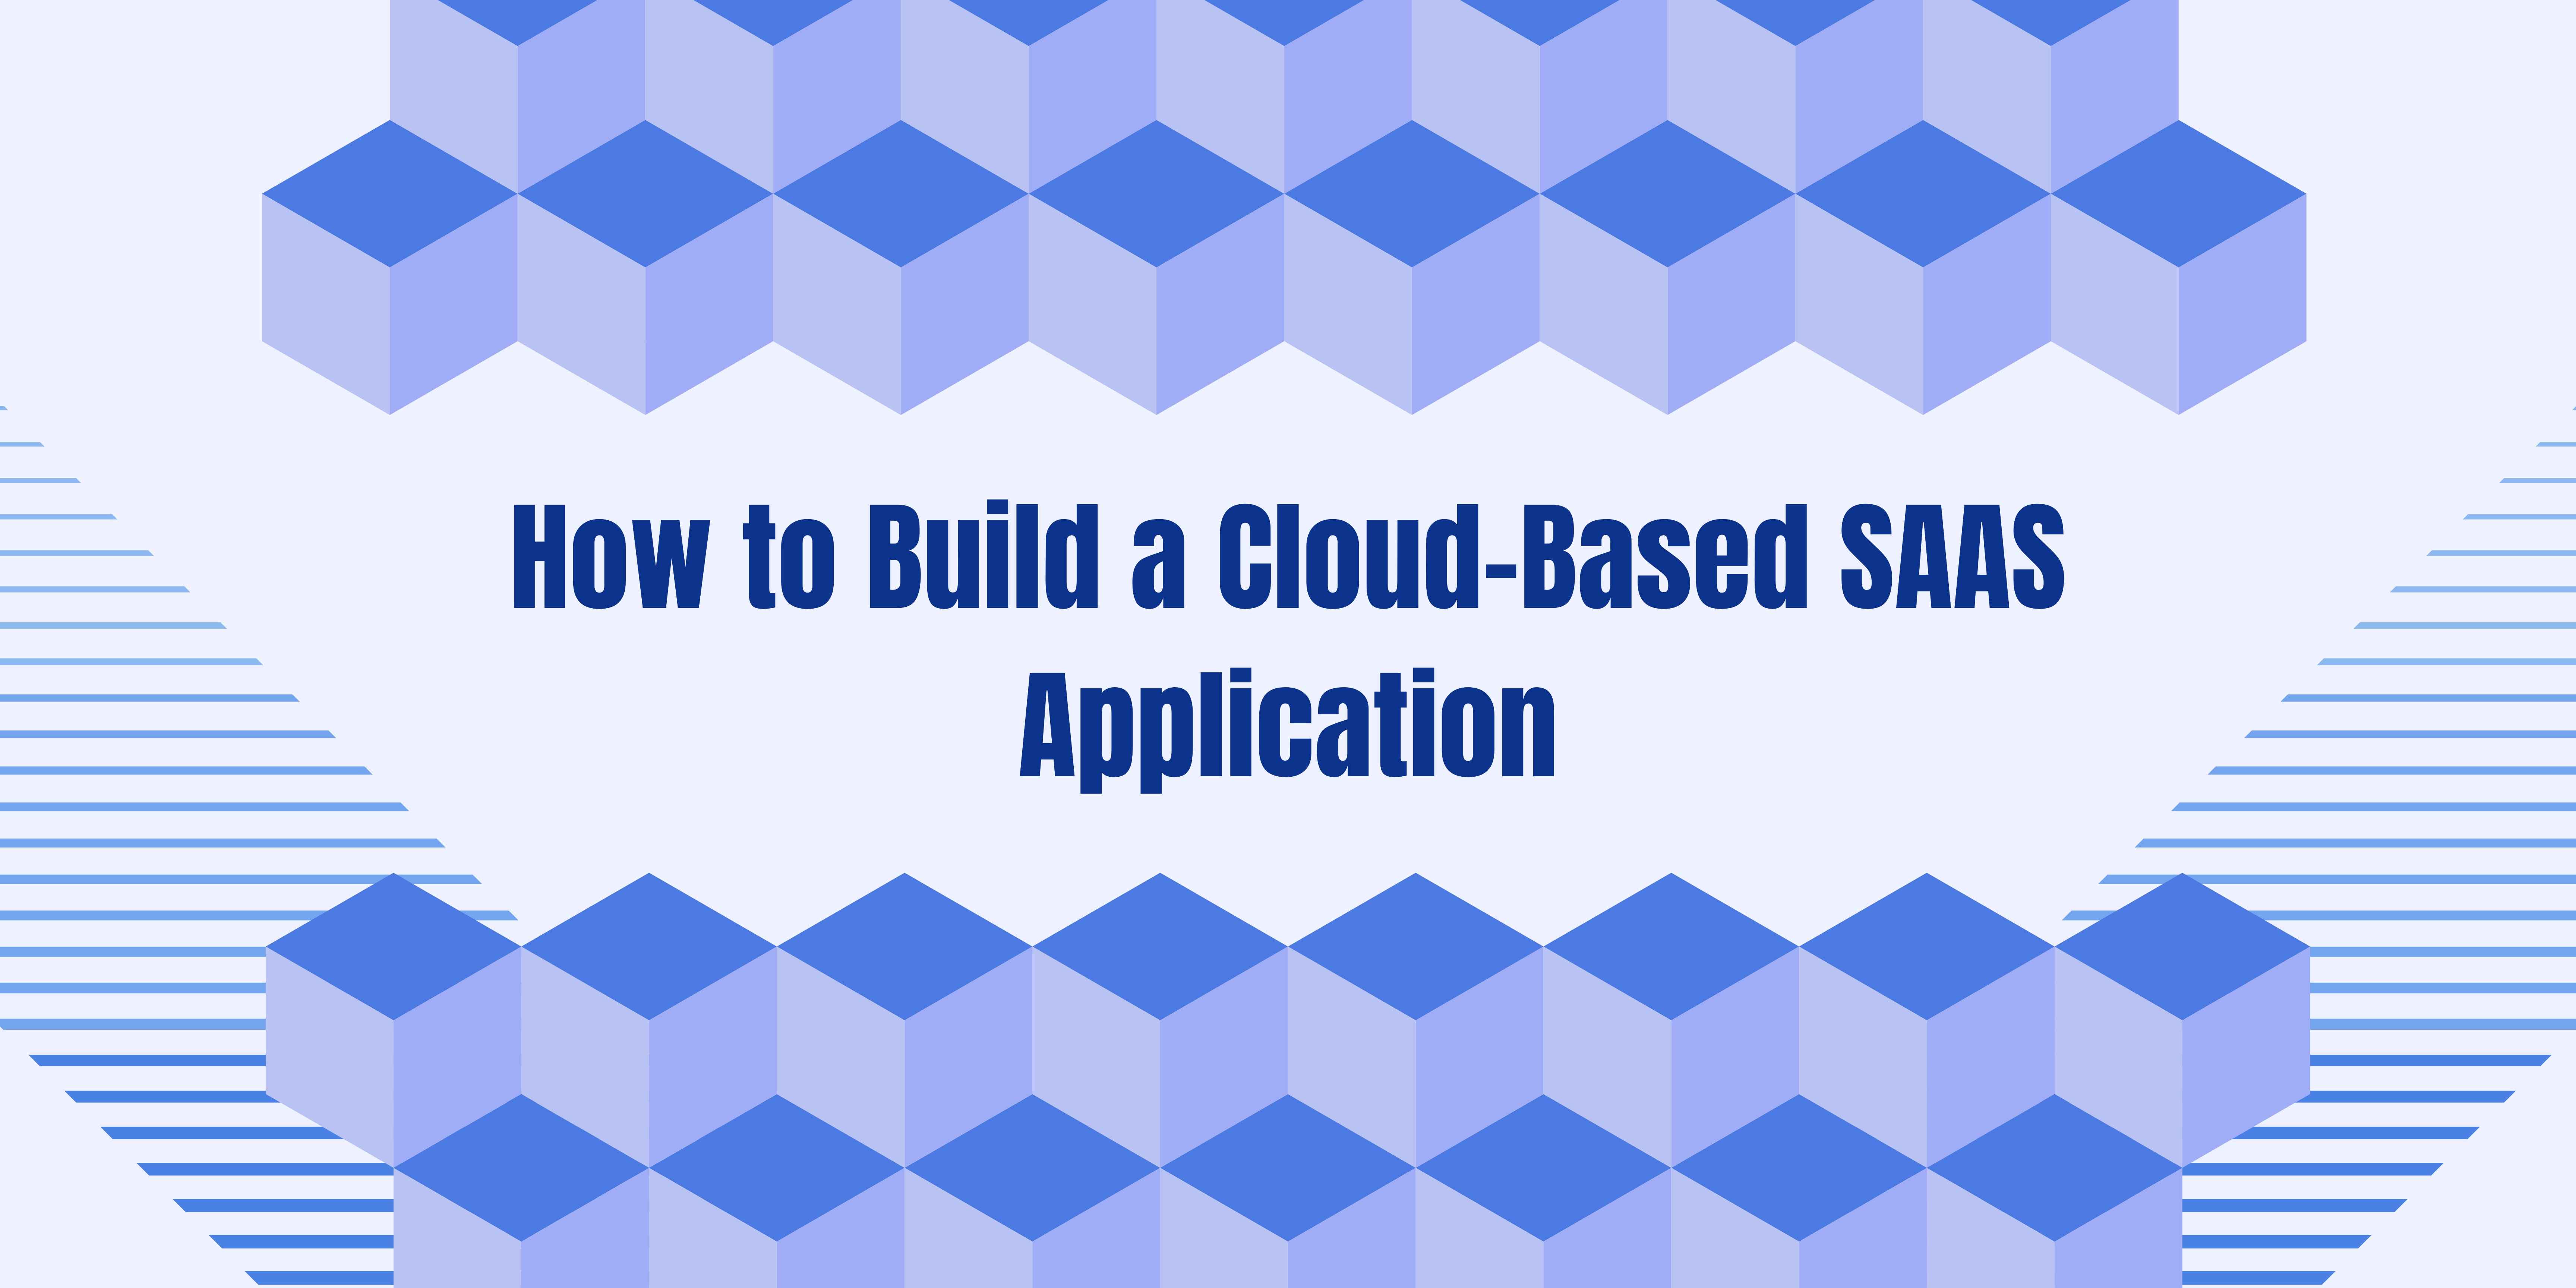 How to Build a Cloud-Based SAAS Application